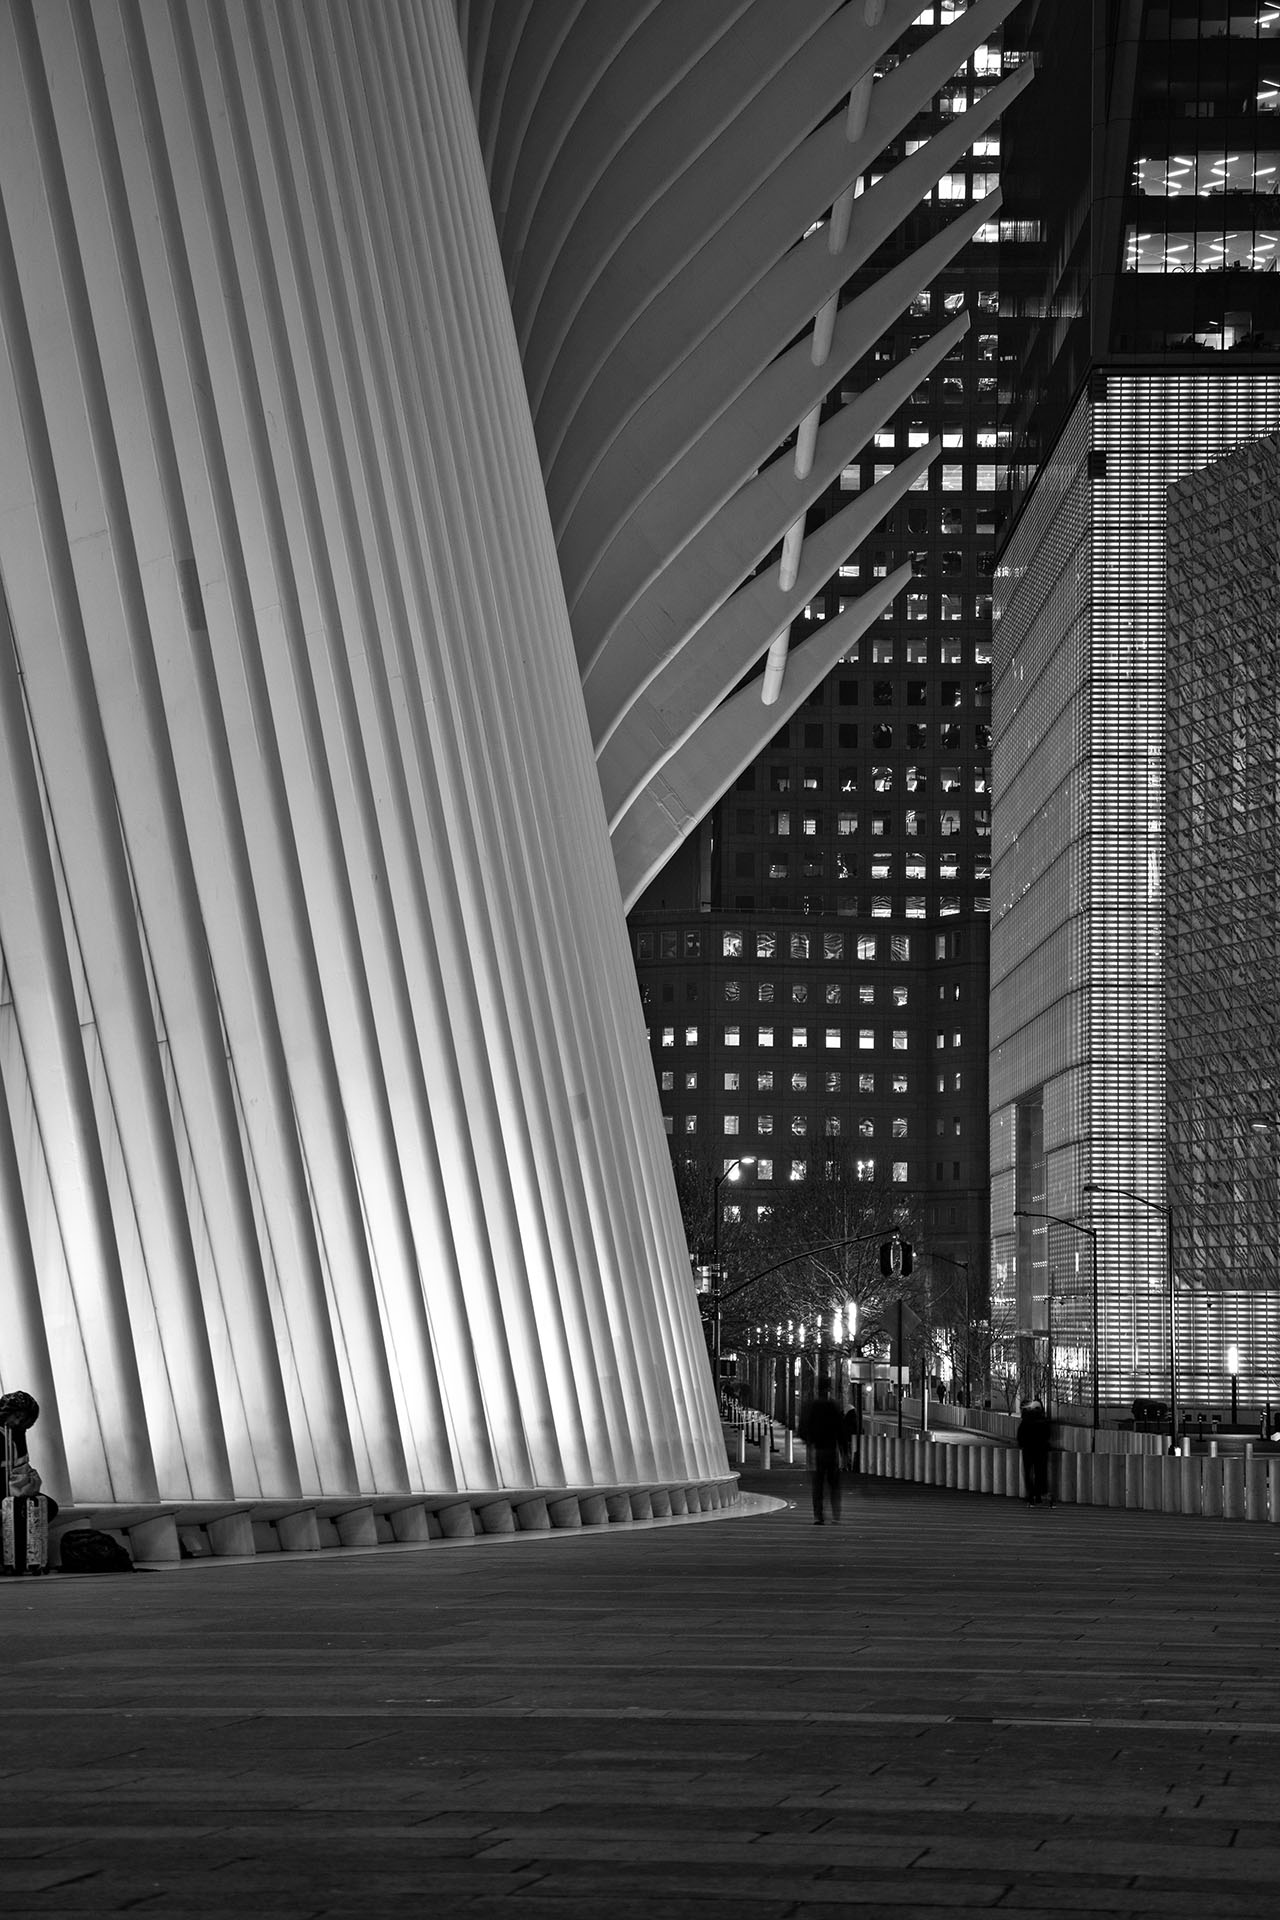 Black and white photo of the Oculus, a modern architectural structure in NYC, with its distinctive rib-like exterior. The photo captures the sleek lines of the building, people walking, and illuminated windows of surrounding skyscrapers at night—symbolizing a hub for issues management and advocacy.